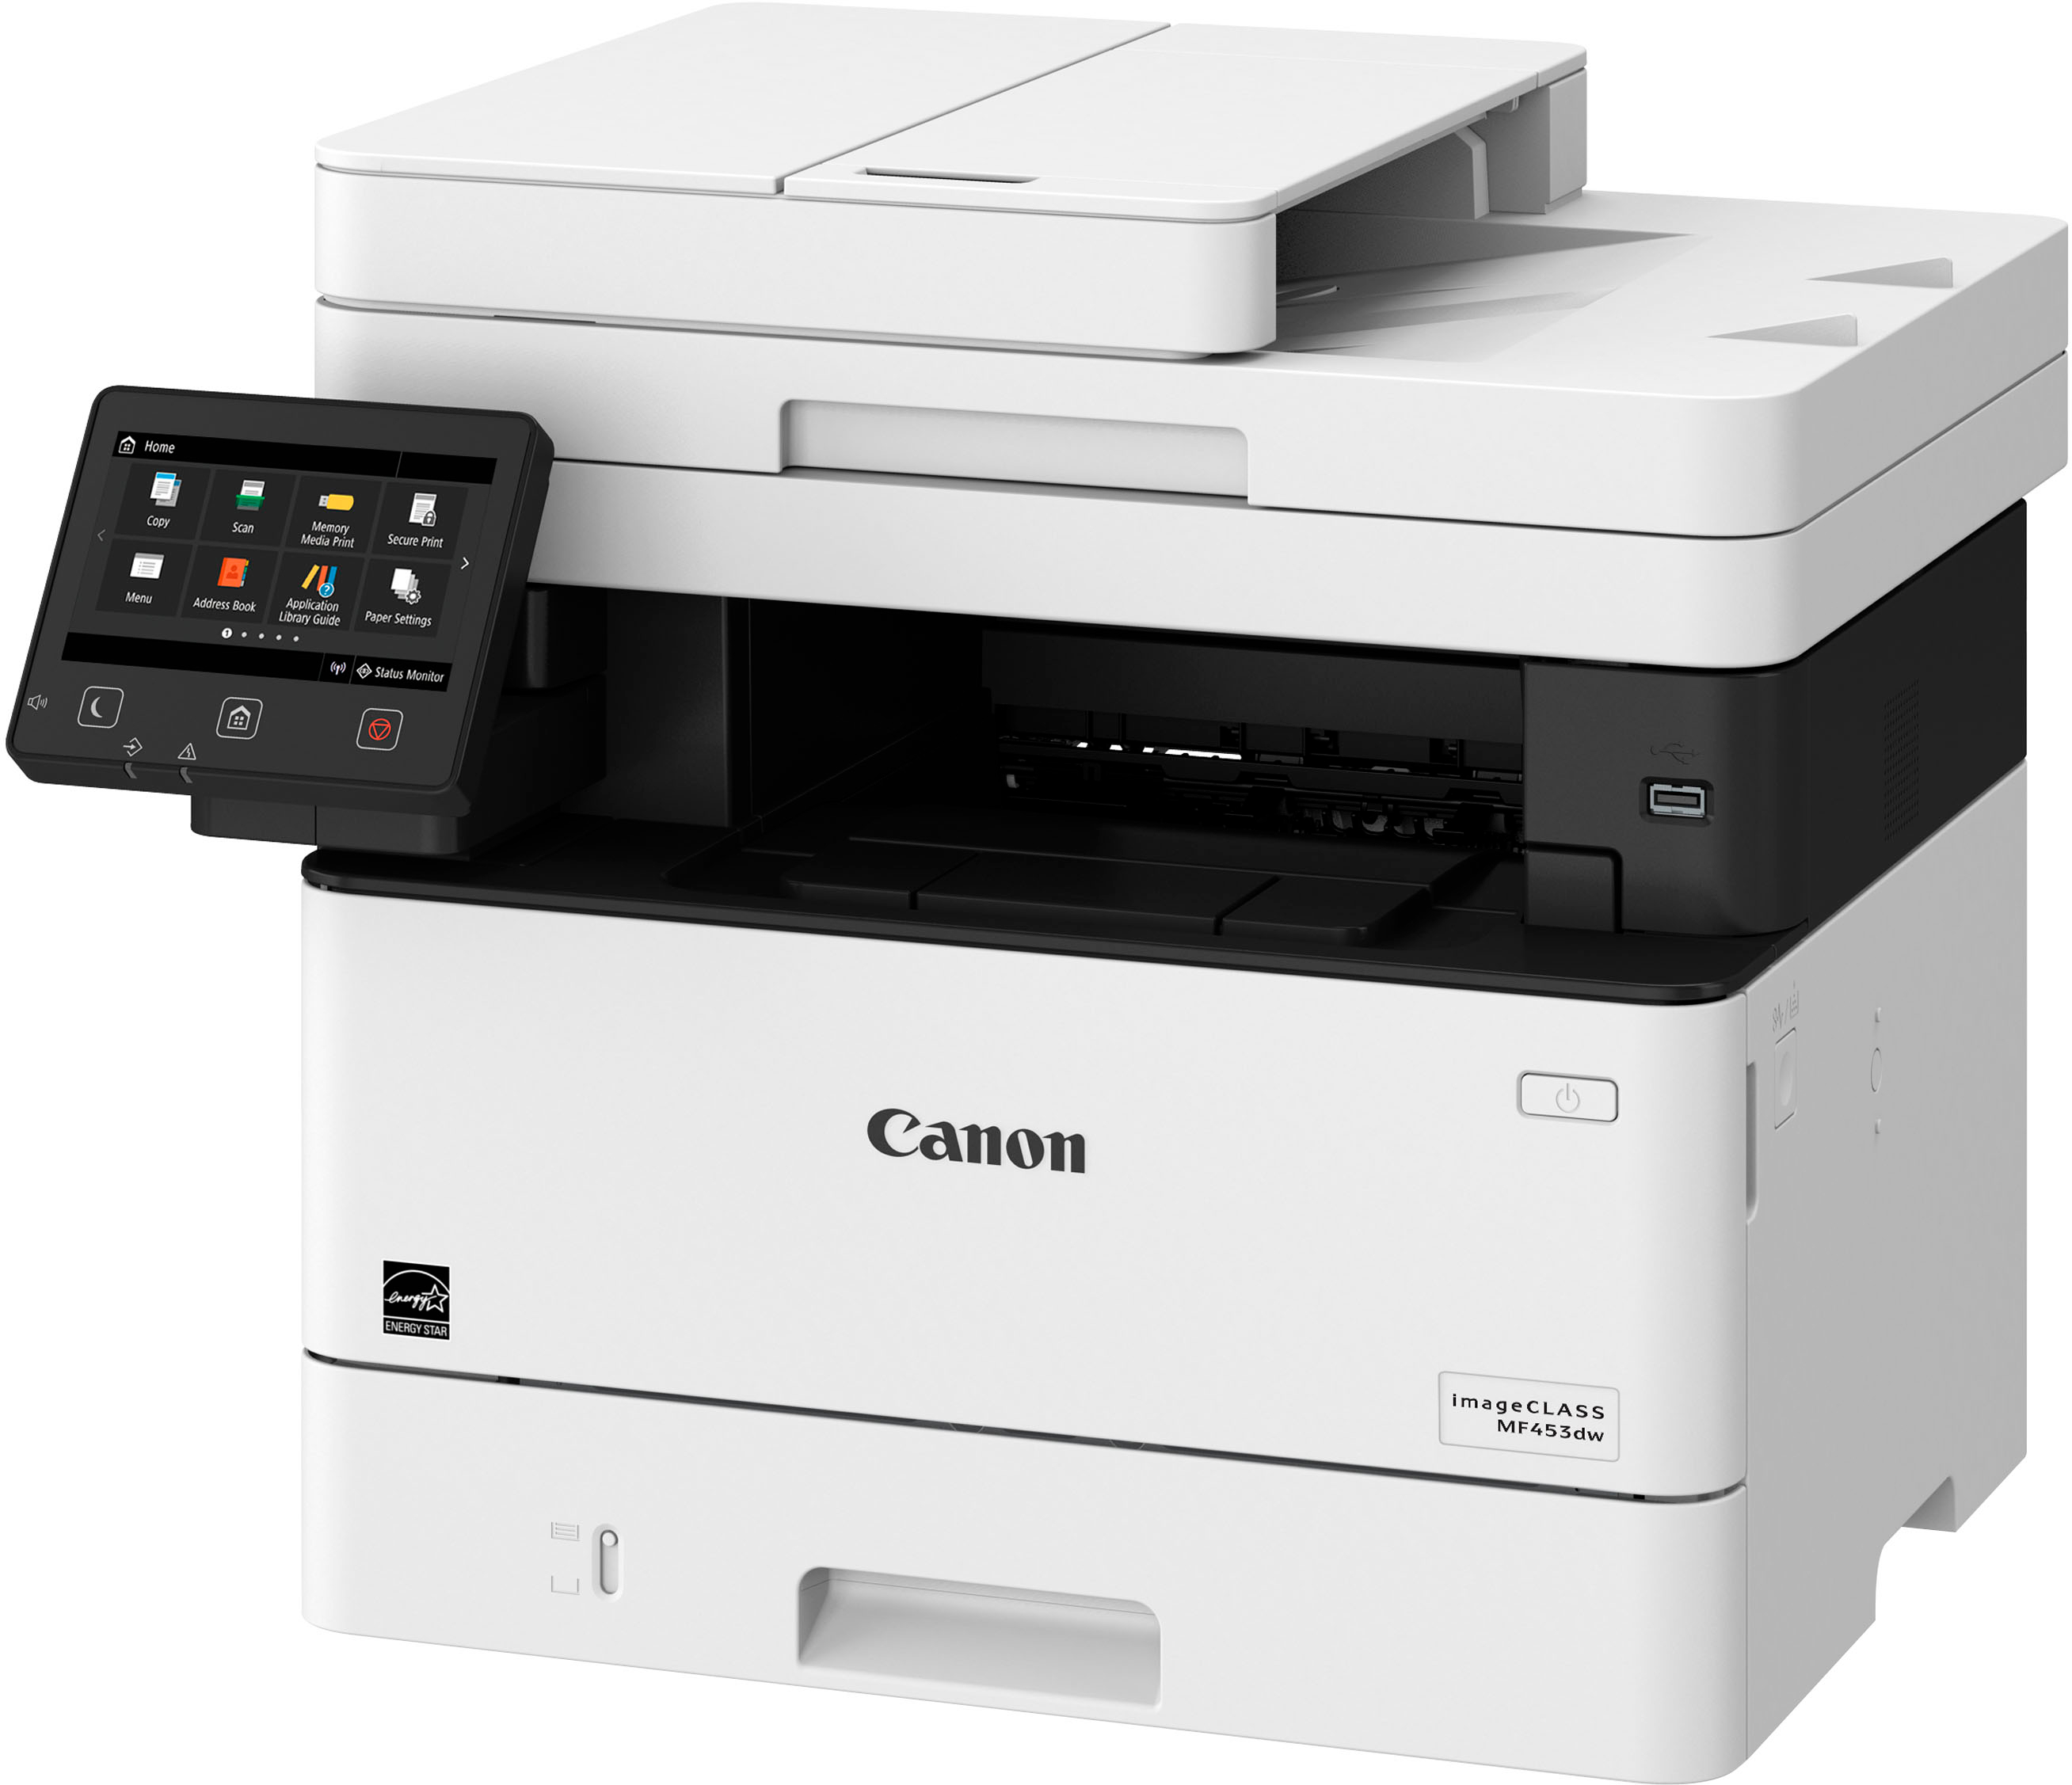 Angle View: Canon - imageClass MF453dw Wireless Black-and-White All-In-One Laser Printer - White